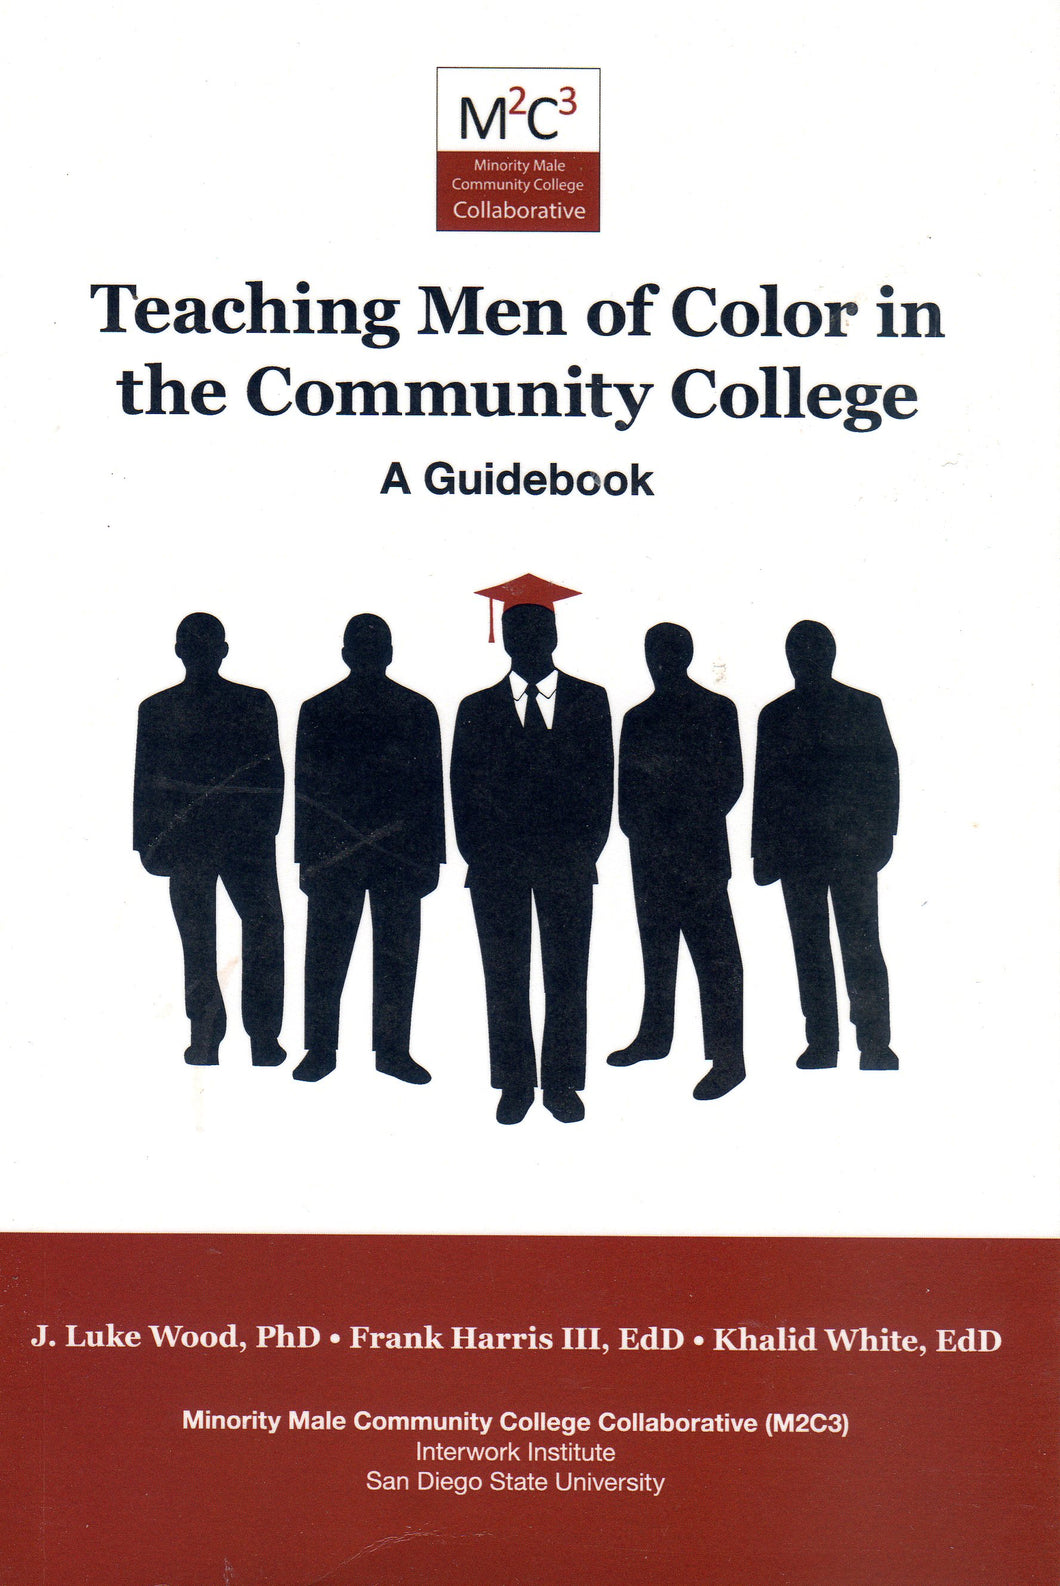 Teaching Men of Color in the Community College (Used Good Condition)